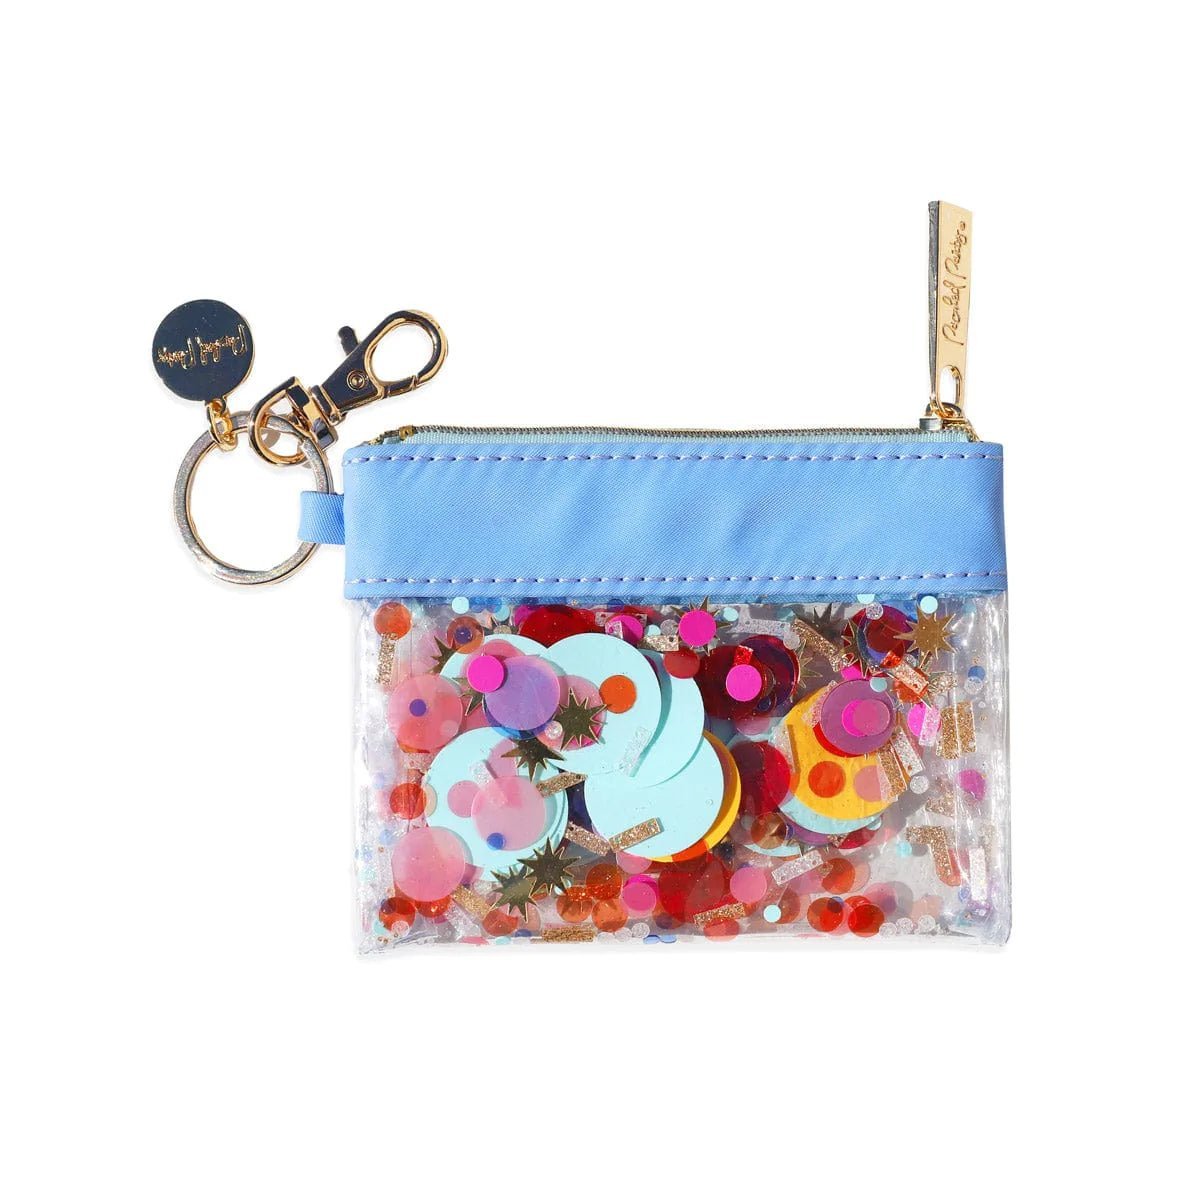 Shop Packed Party Piece of Cake Confetti Keychain Wallet - Premium Clutch Bag from Packed Party Online now at Spoiled Brat 